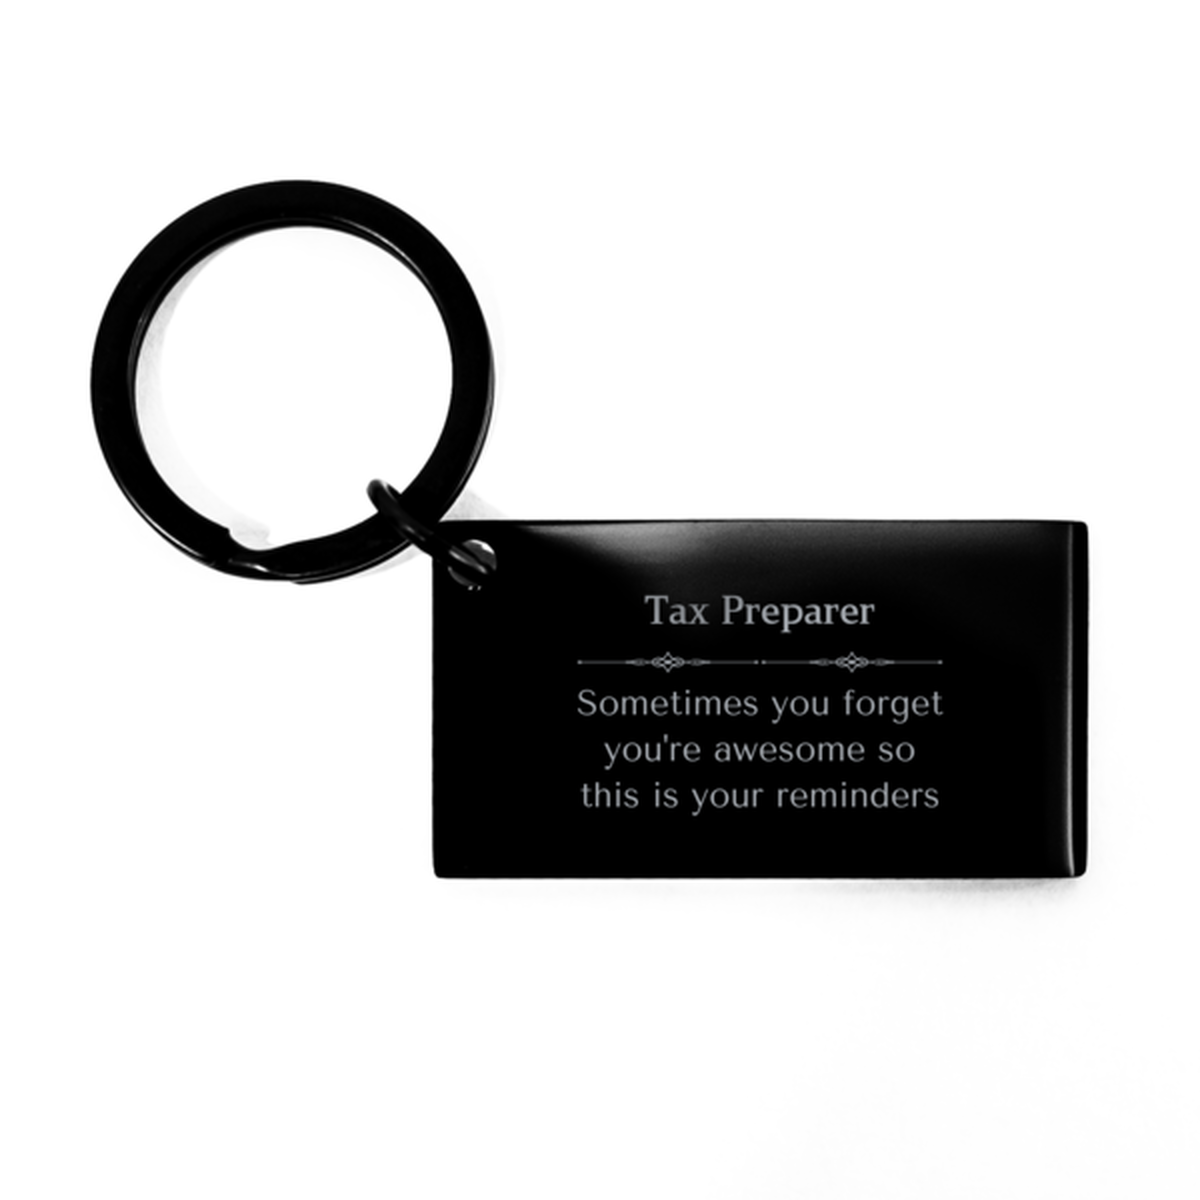 Sentimental Tax Preparer Keychain, Woodworker Sometimes you forget you're awesome so this is your reminders, Graduation Christmas Birthday Gifts for Tax Preparer, Men, Women, Coworkers